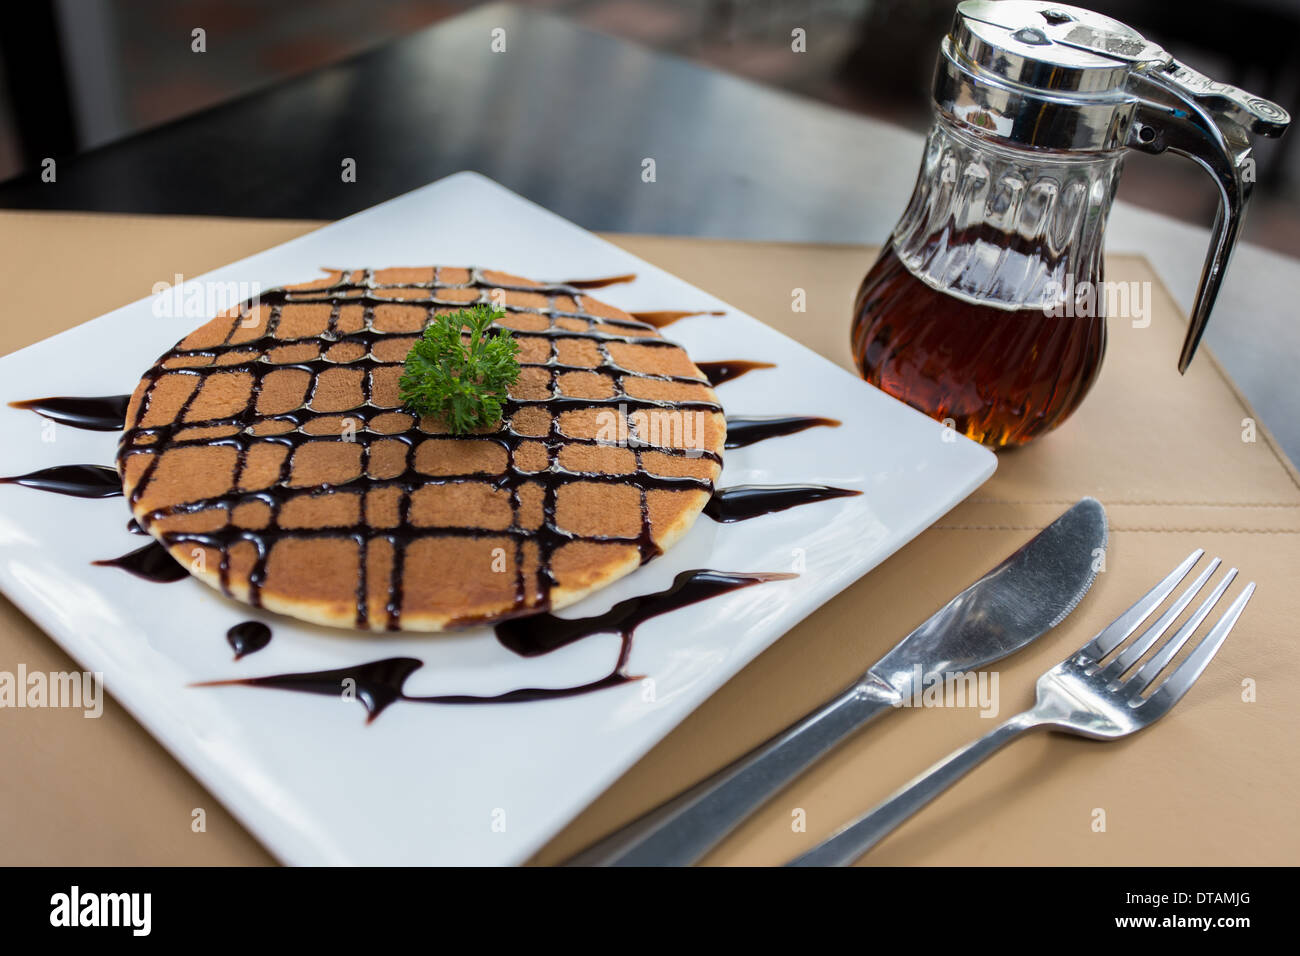 Pancake with honey syrup and Chocolate sauce Stock Photo